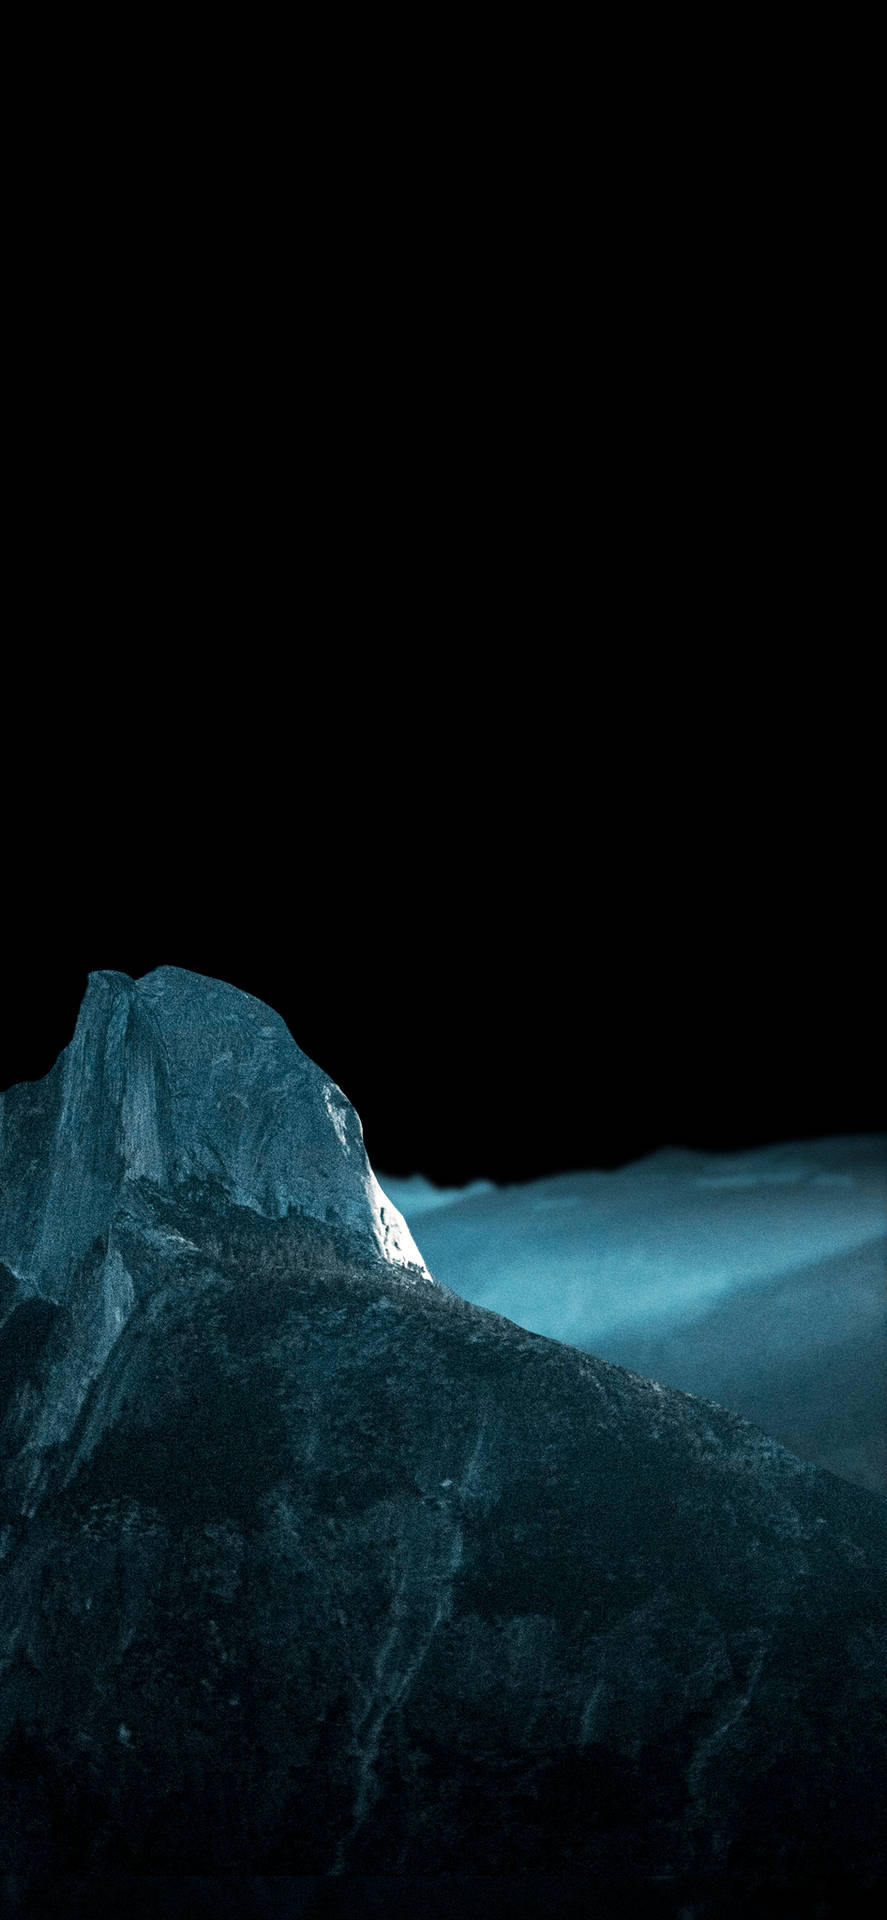 Iphone Xs Max Oled Blue Mountains Wallpaper